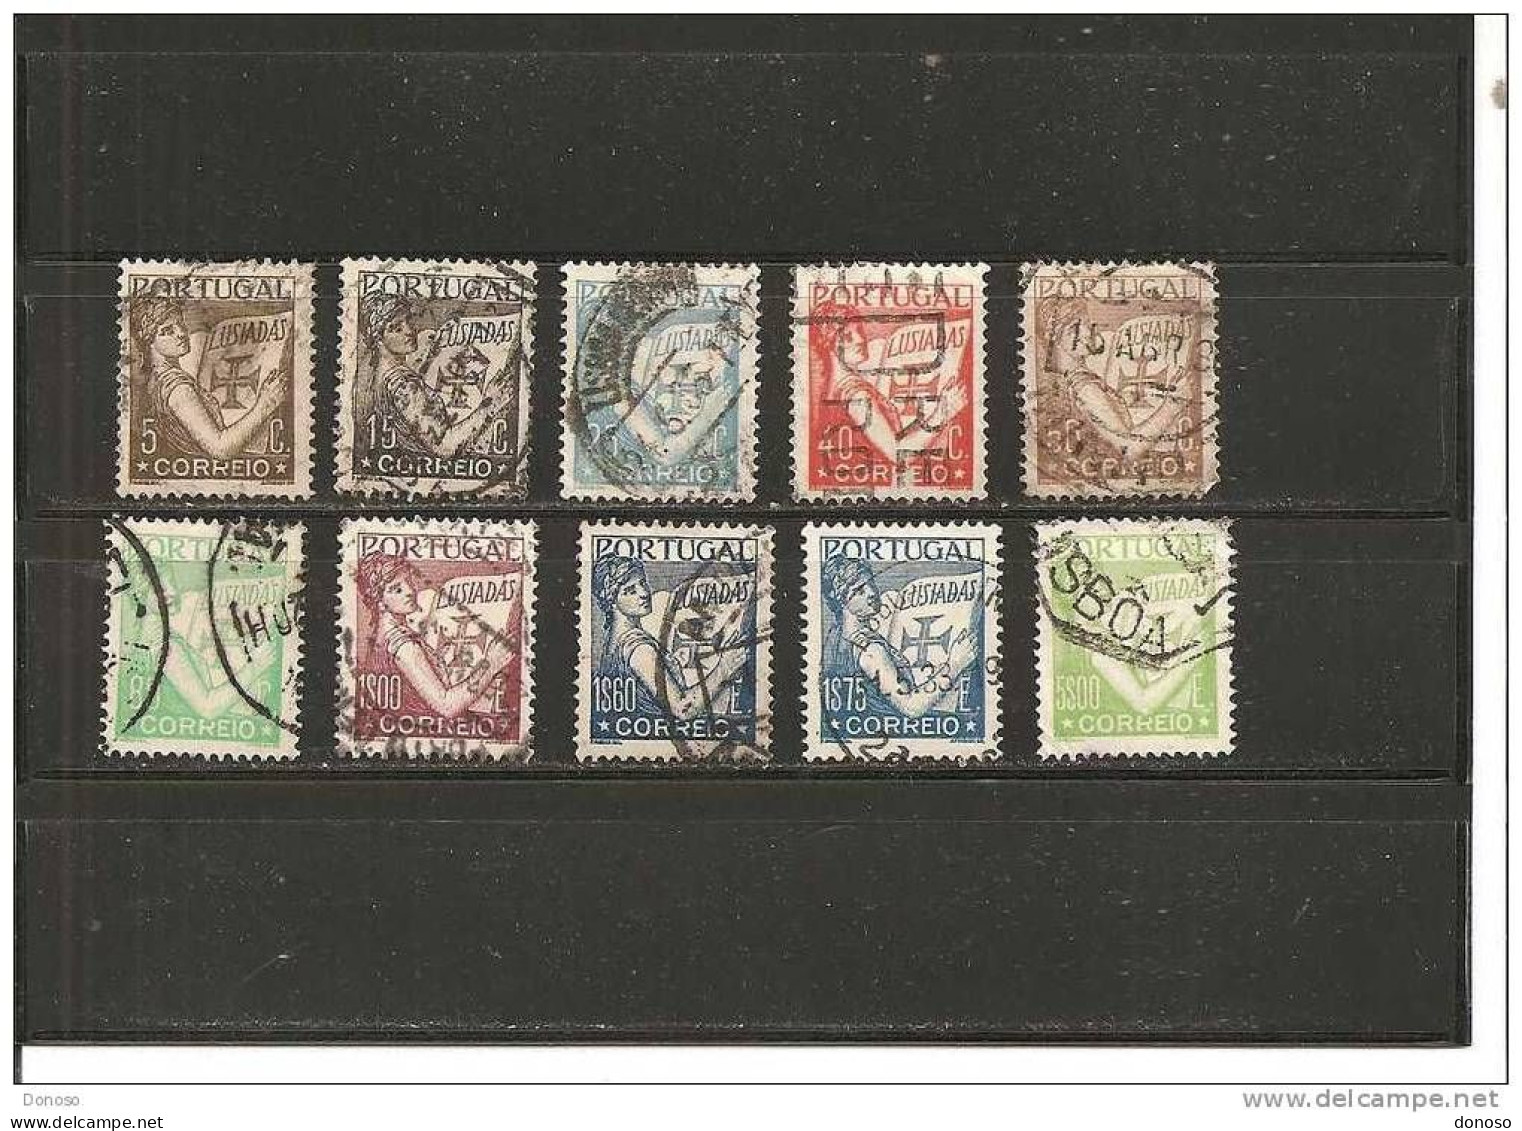 PORTUGAL 1931 LUSIADES Yvert 530 + 533 + 535A + 536 + 538 + 540 + 541 + 543A-543B + 546 Oblitéré, Used Cote : 6.50 Euro - Used Stamps